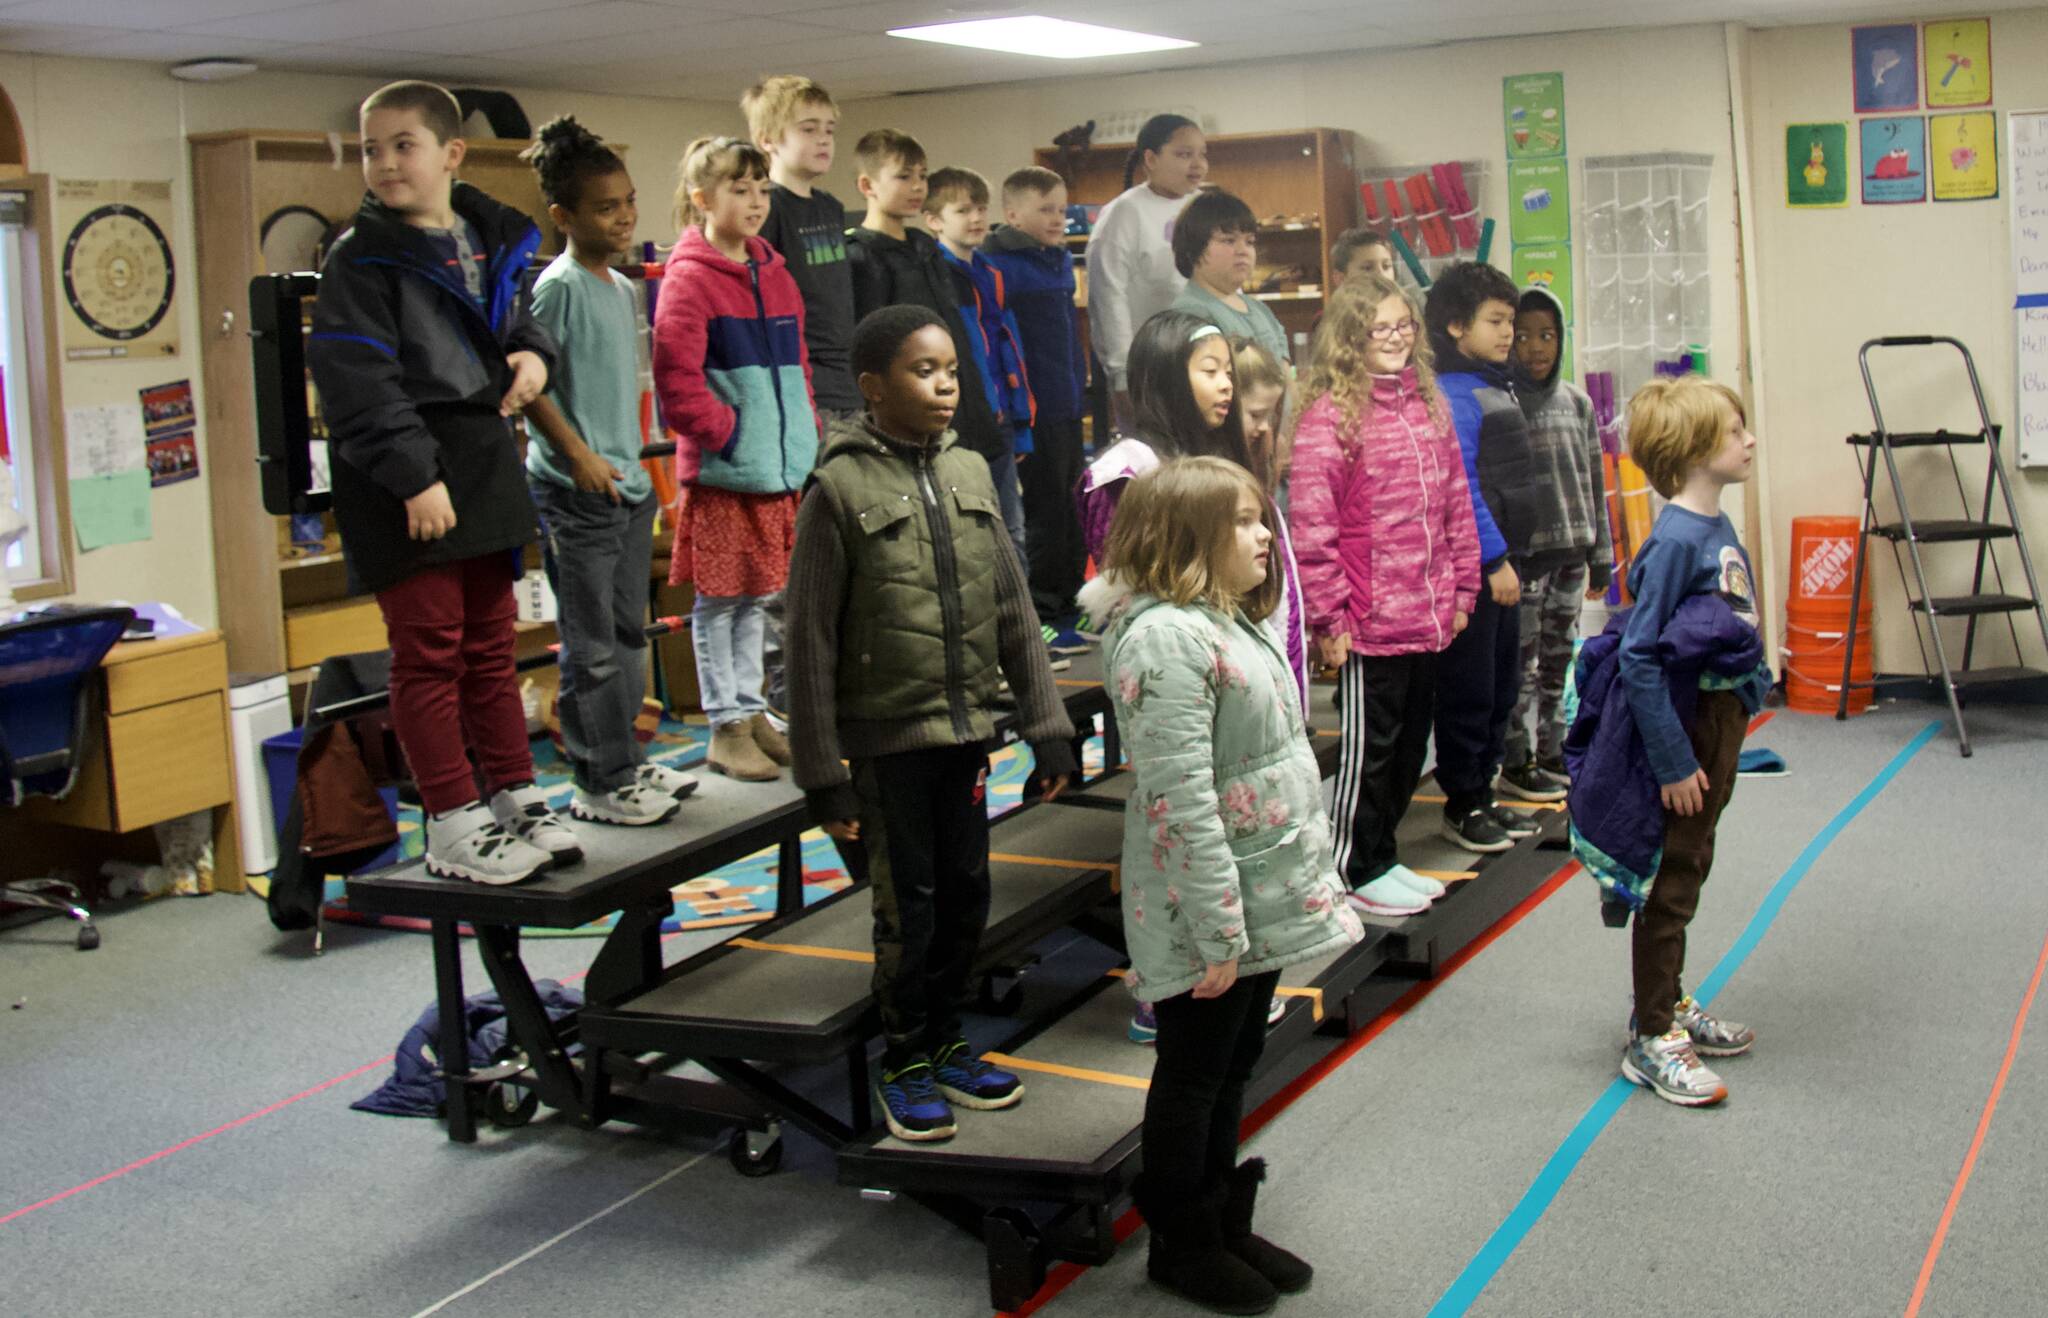 In total, eight classes at Crescent Harbor Elementary take place in portable classrooms, including music. (Photo by Rachel Rosen/Whidbey News-Times)